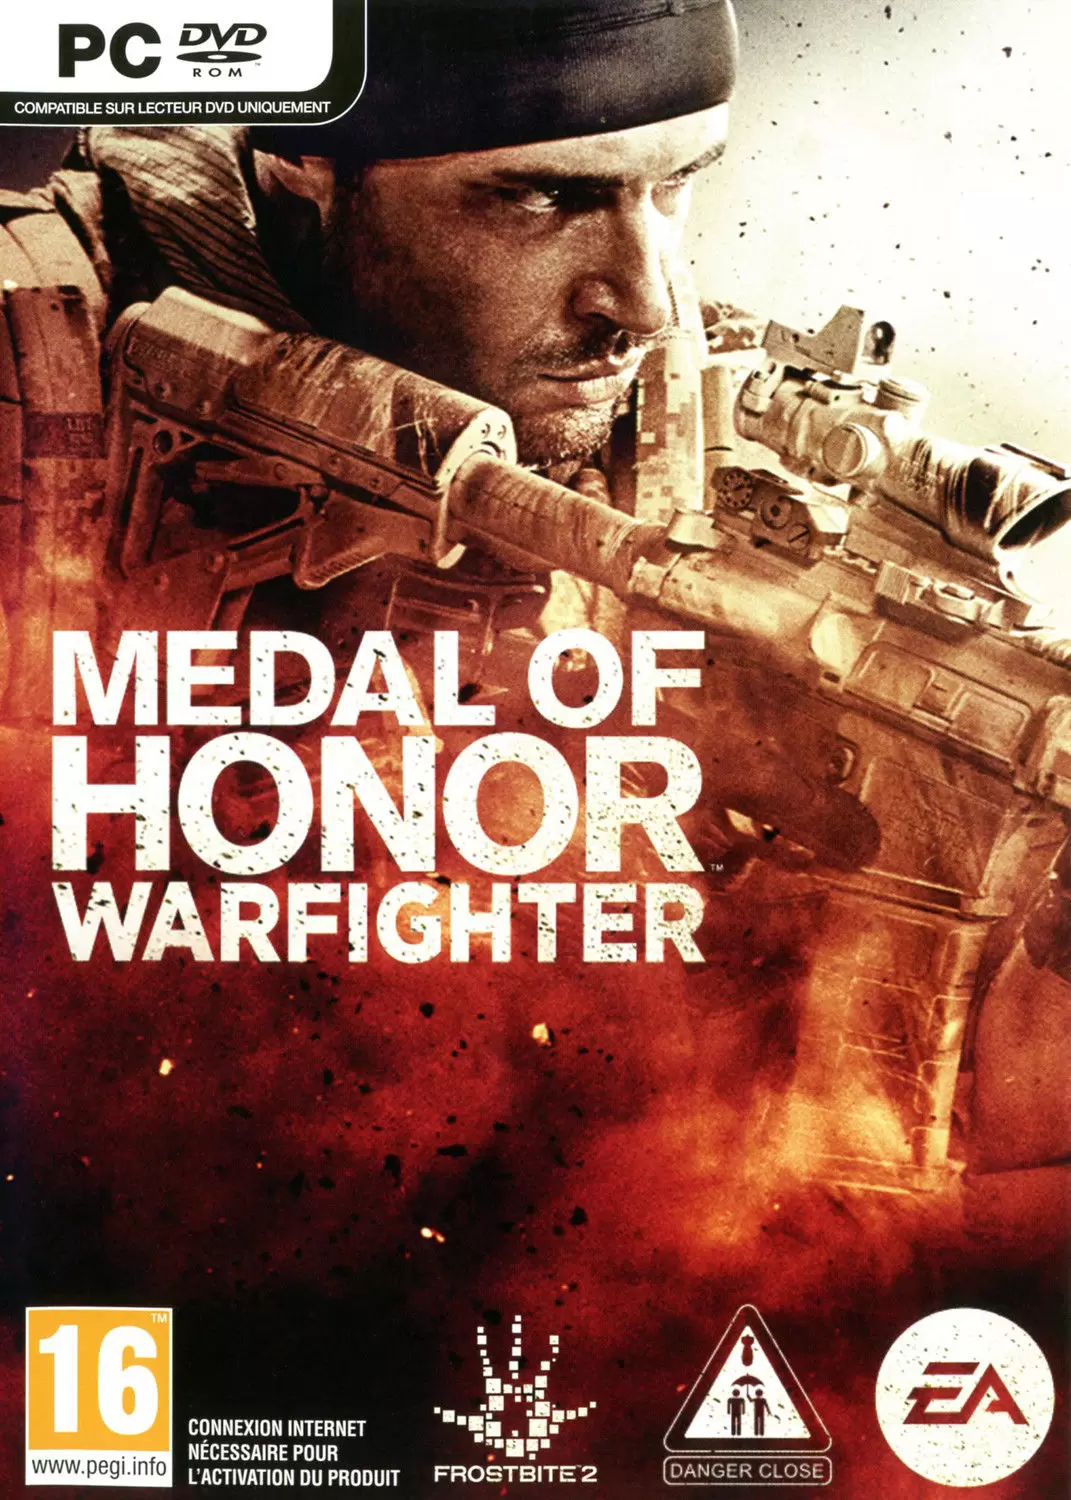 Jeux PC - Medal of Honor : Warfighter